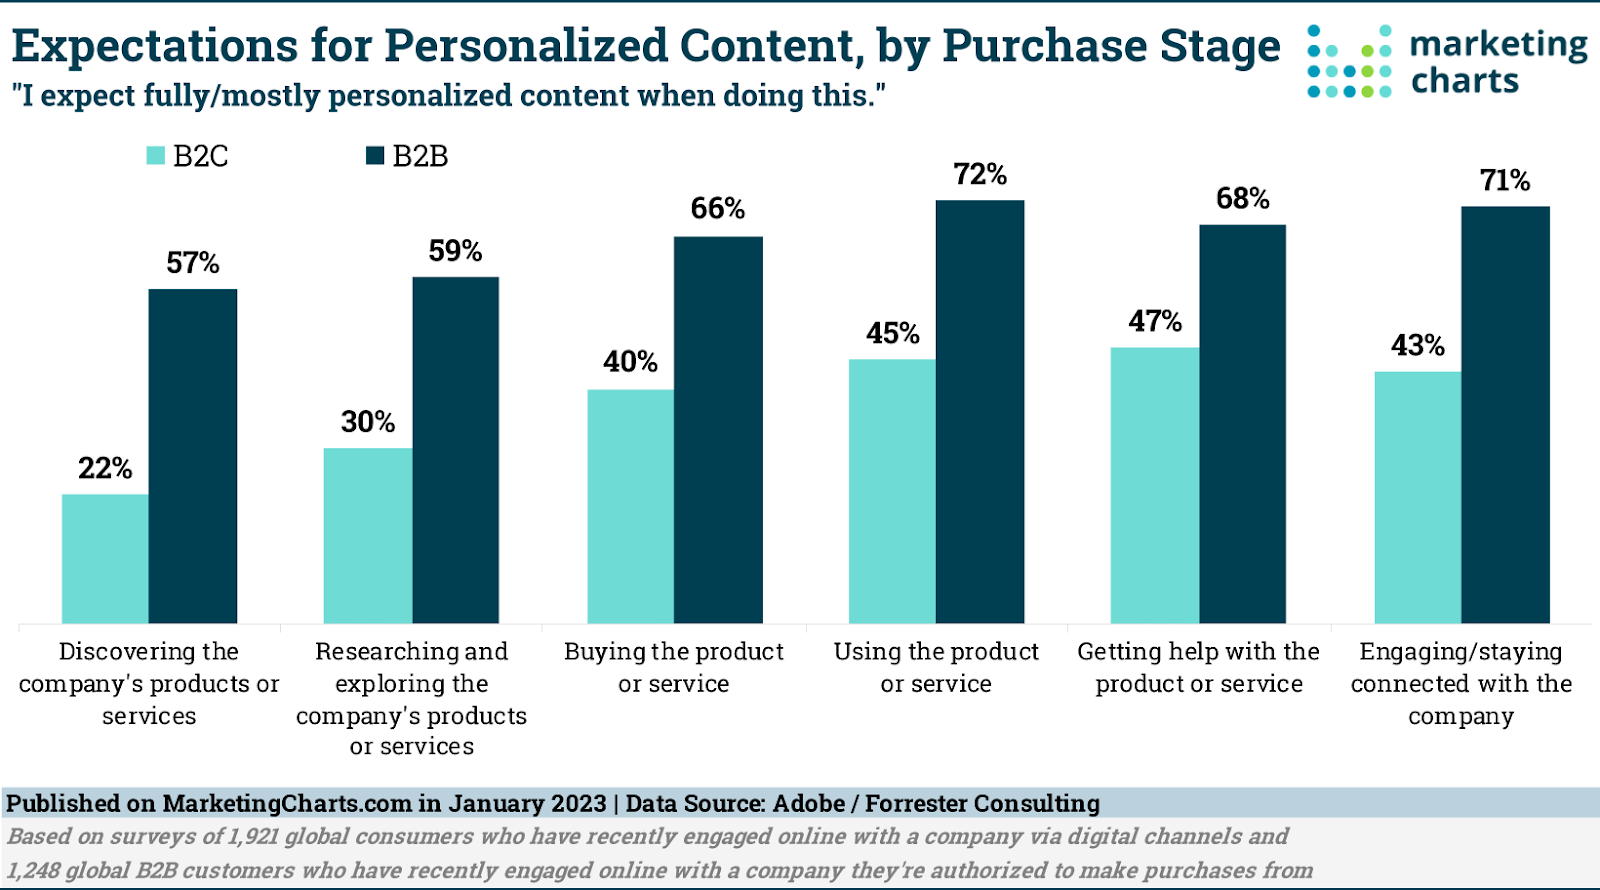 Bar chart showing that B2B customers want personalized content at every stage of the purchase journey